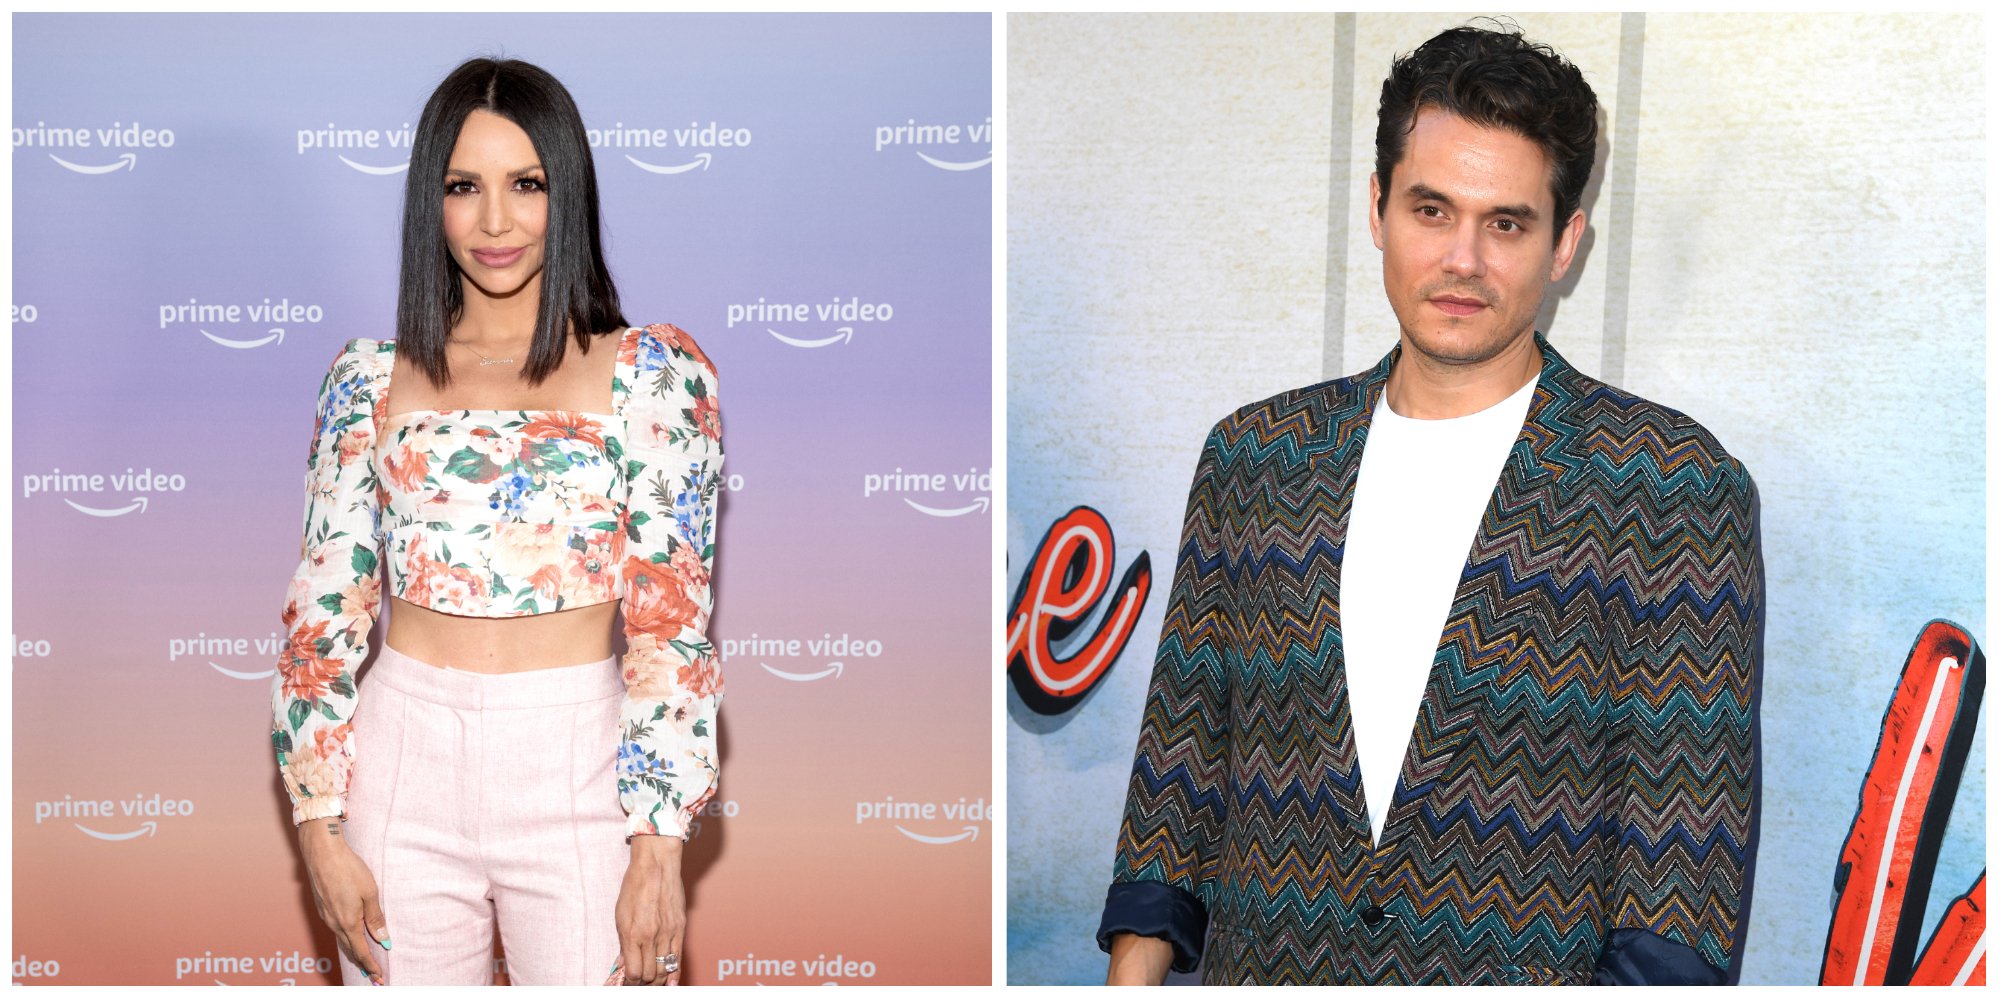 ‘Vanderpump Rules’: Scheana Shay Jokes John Mayer Is the Reason She Ended up on the Show